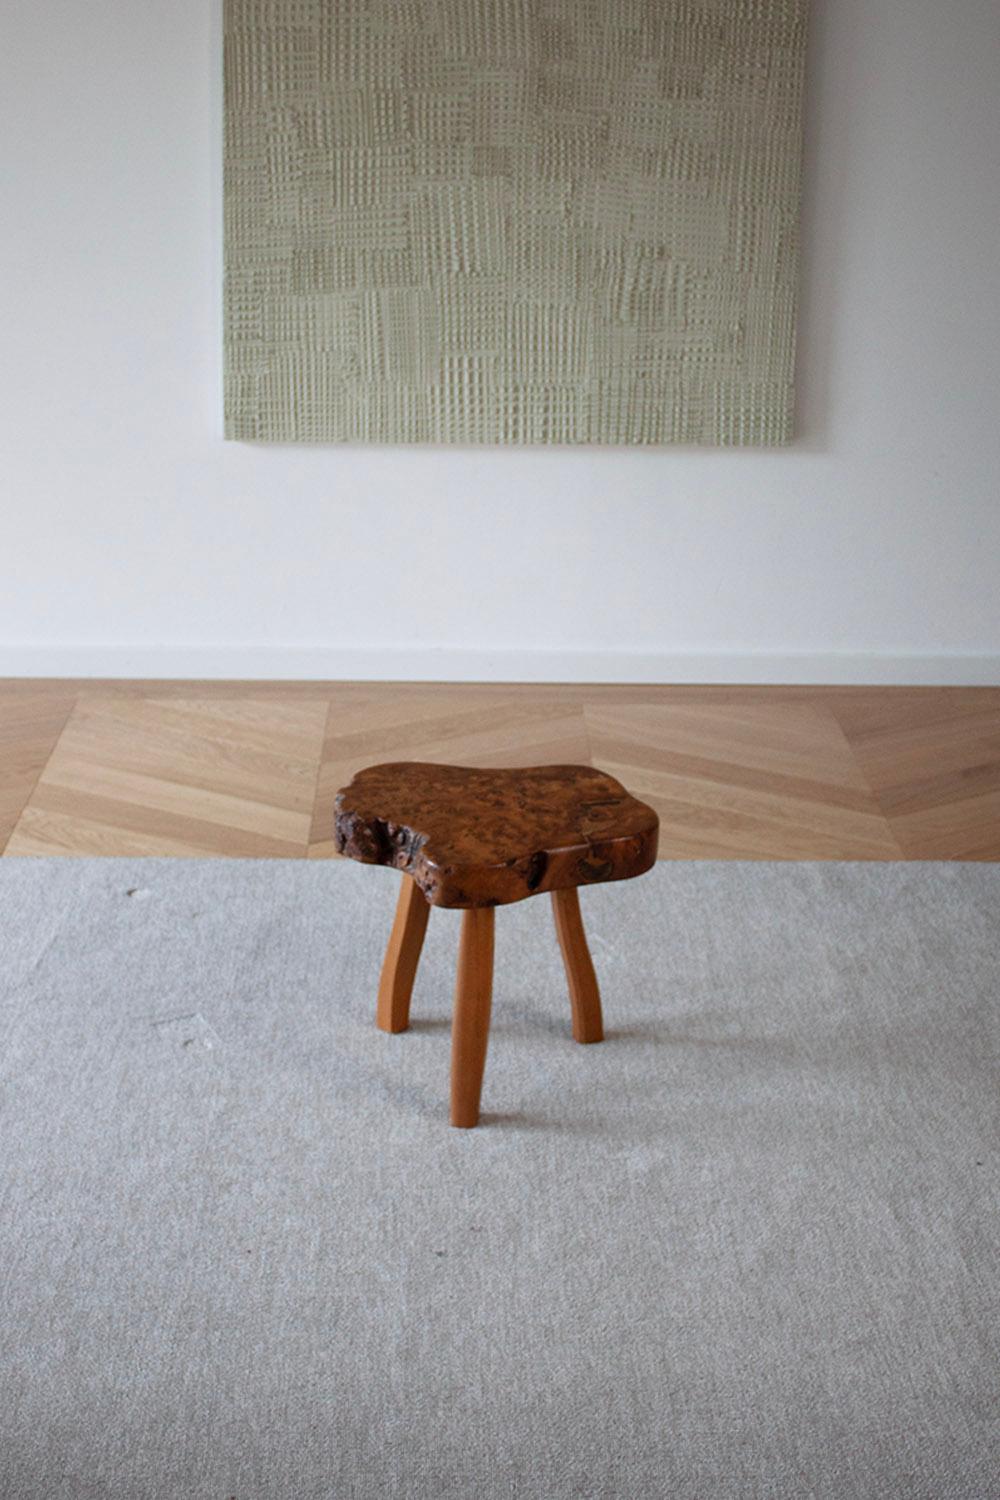 available is a hand-carved three-legged chair made from burl wood.
the stool stands on three legs which have a very elegant curve. the stool top has a stunning wood grain. 
The stool is one of a set of four and can also be purchased as a complete